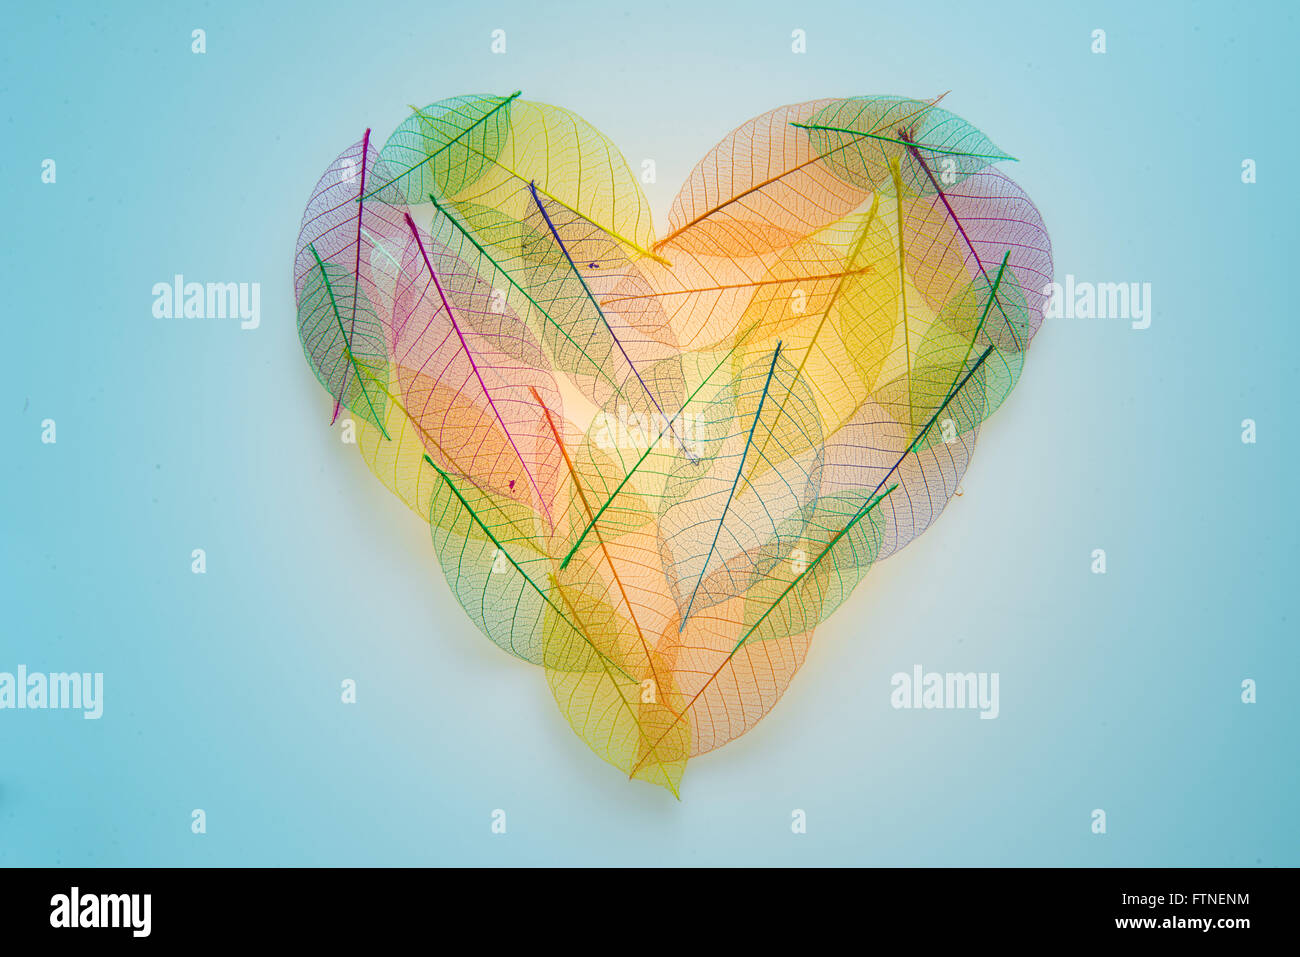 Heart shaped leaves transparent texture Stock Photo